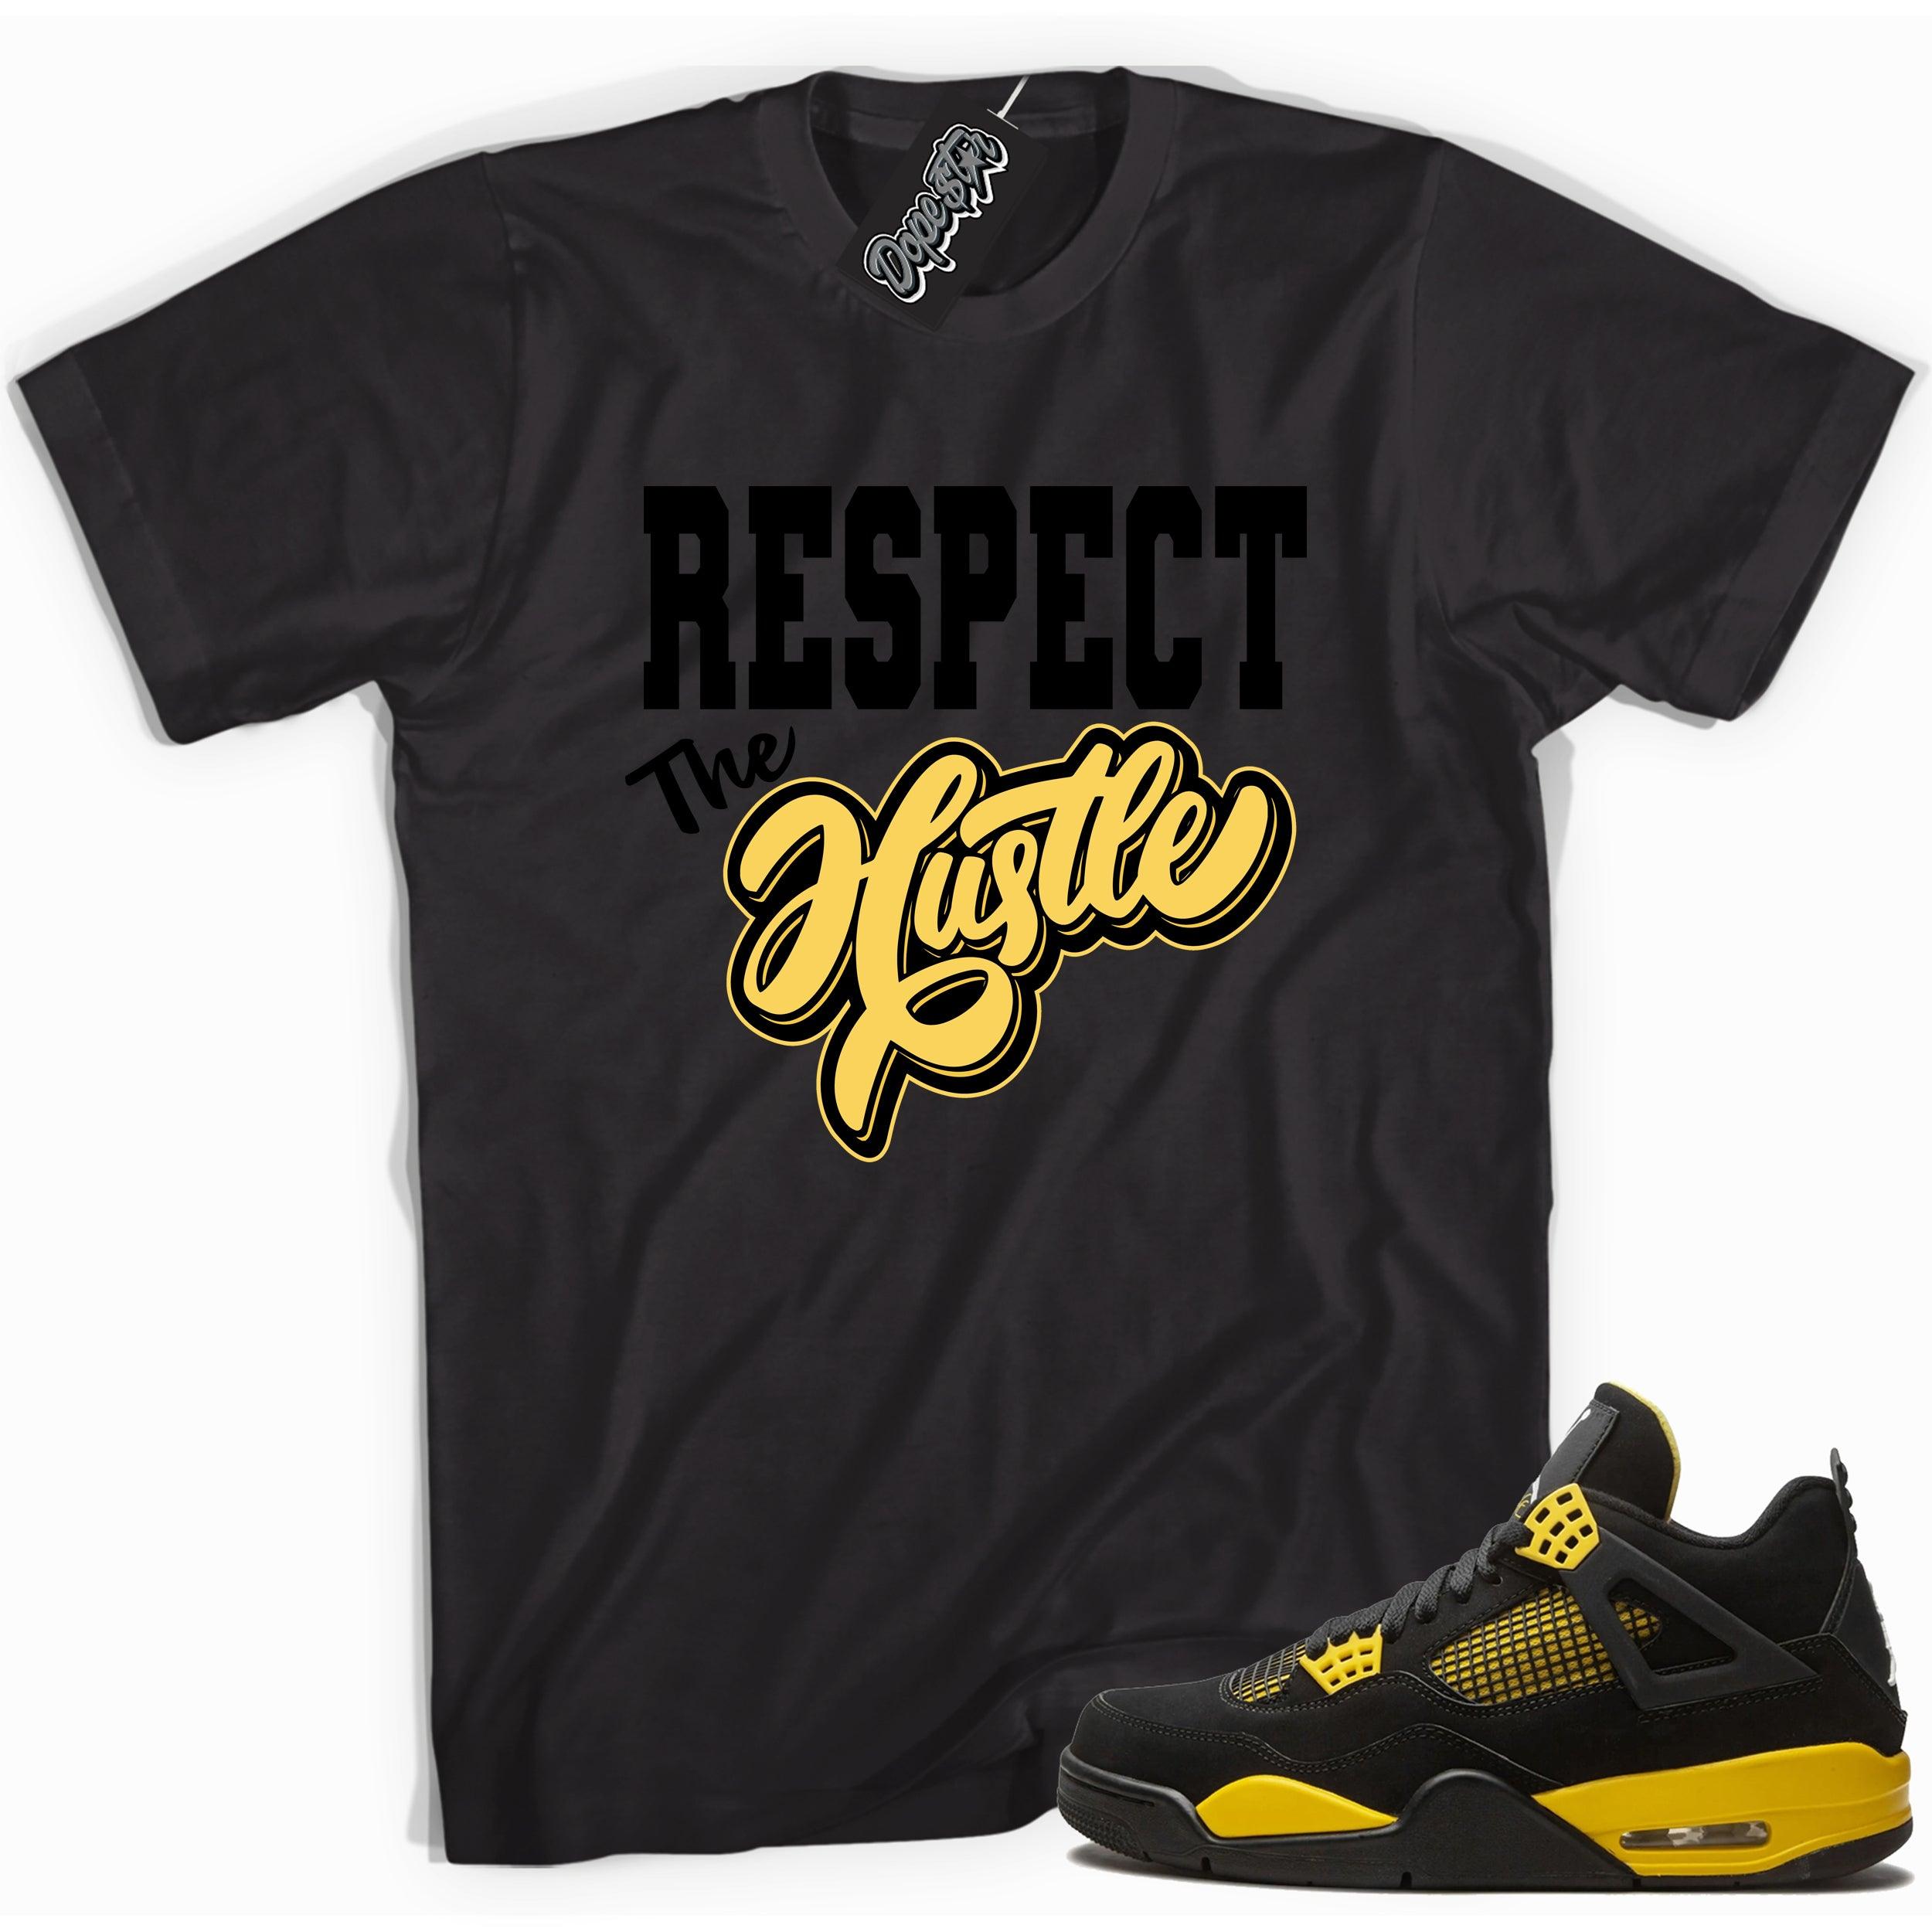 Cool black graphic tee with 'respect the hustle' print, that perfectly matches  Air Jordan 4 Thunder sneakers